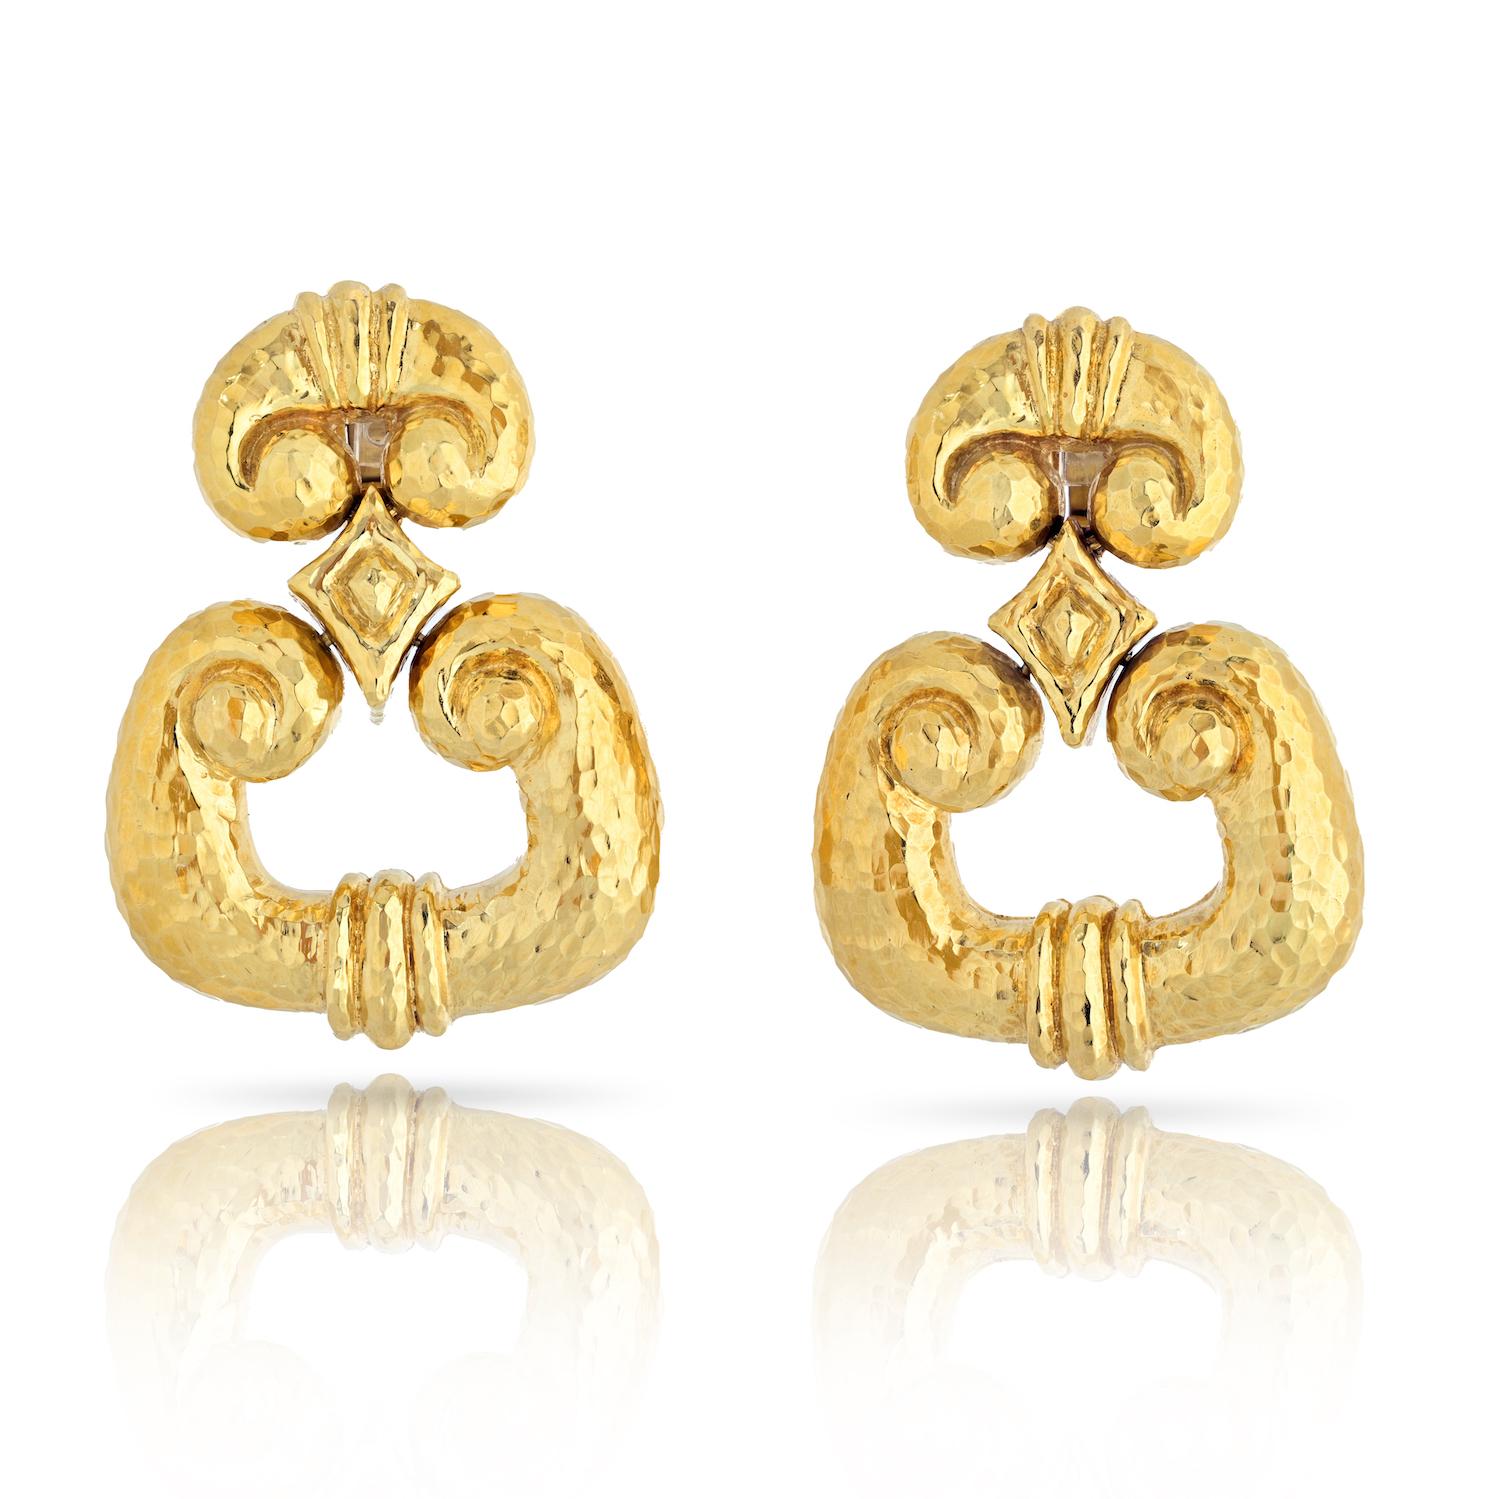 Elevate your style with these exquisite David Webb Platinum & 18K Yellow Gold Hammered Door Knockers Earrings. Measuring at a perfect length of 1¾ inches, these earrings offer a harmonious blend of modern luxury and timeless elegance. The